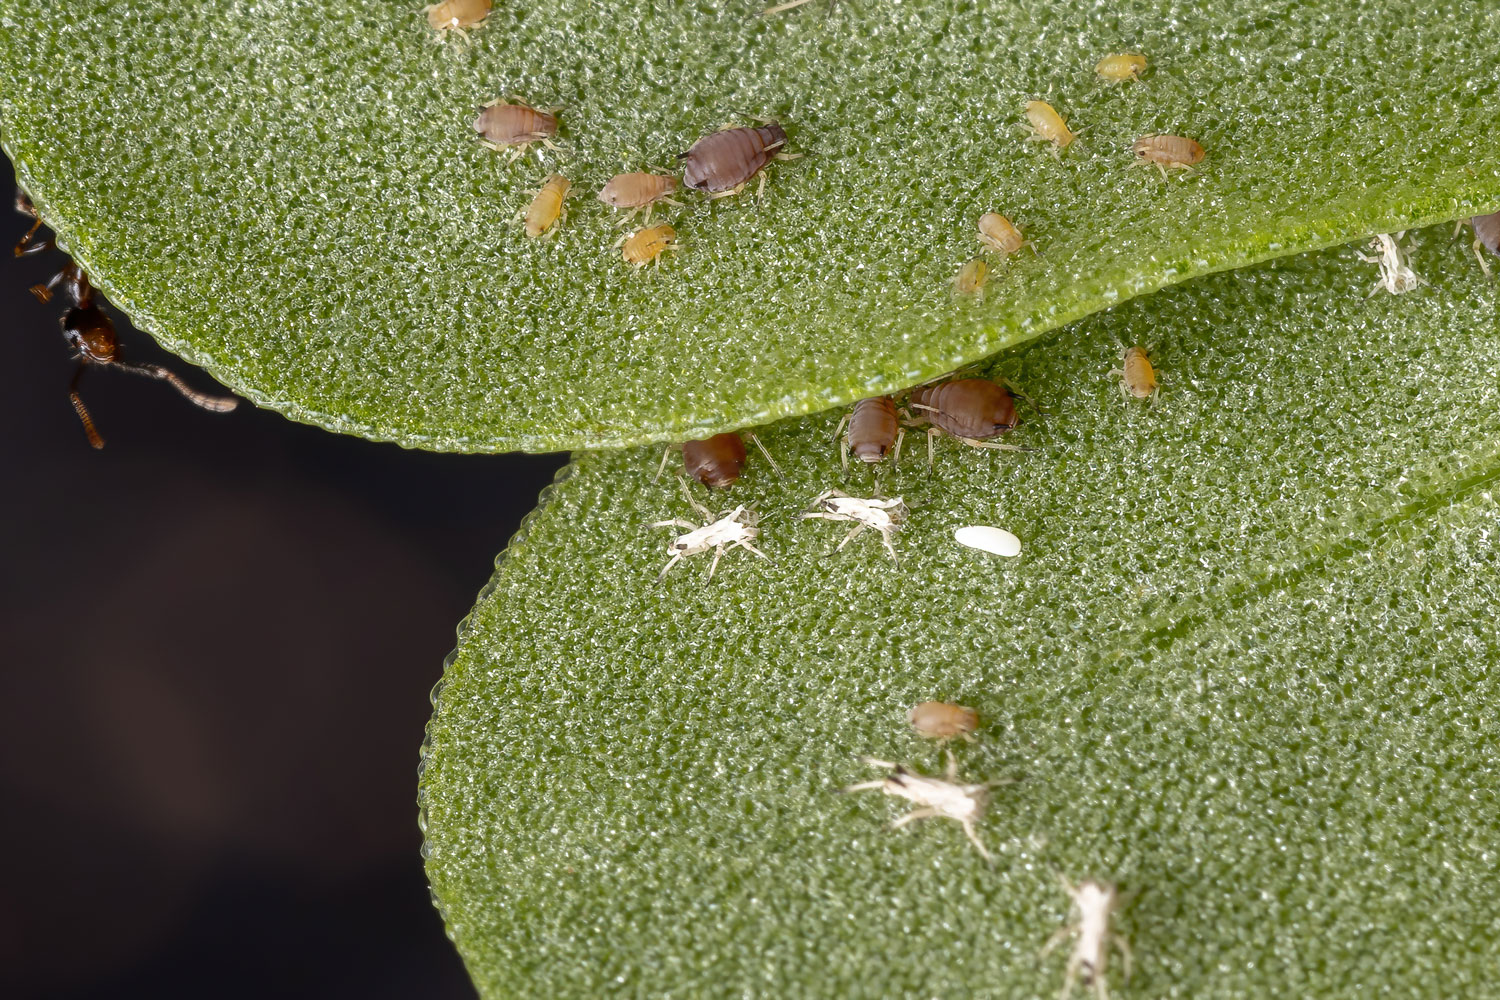 Brown Citrus Aphids of the species Toxoptera citricida eating the Common Purslane plant of the species Portulaca oleracea 